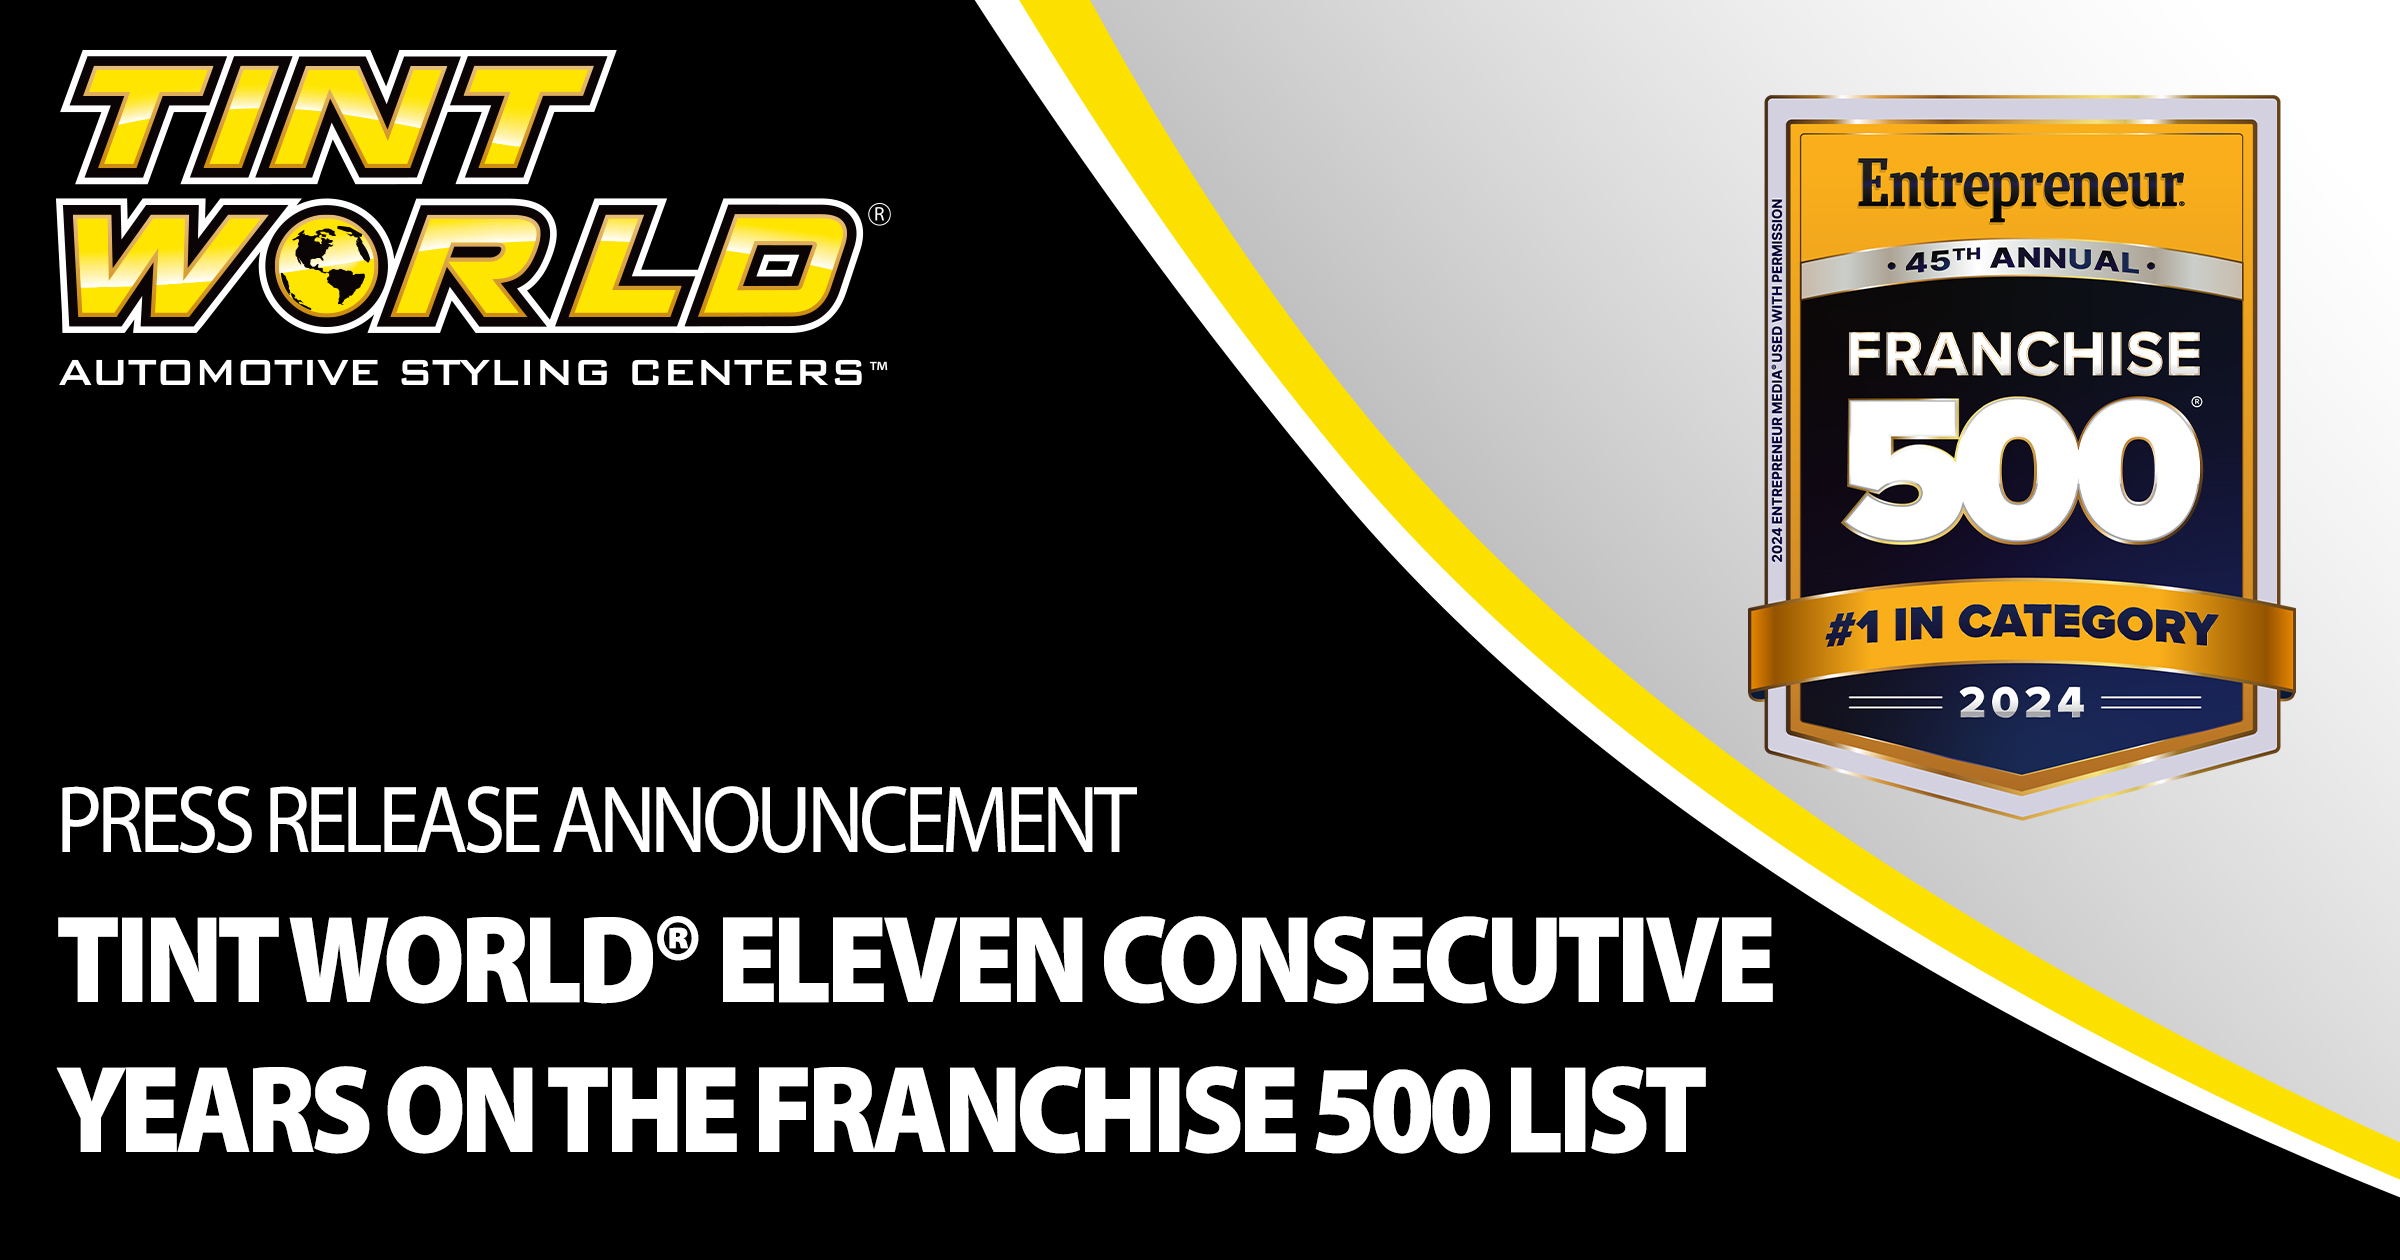 Tint World® Ranked a Top Franchise for Entrepreneur’s 45th annual 2024